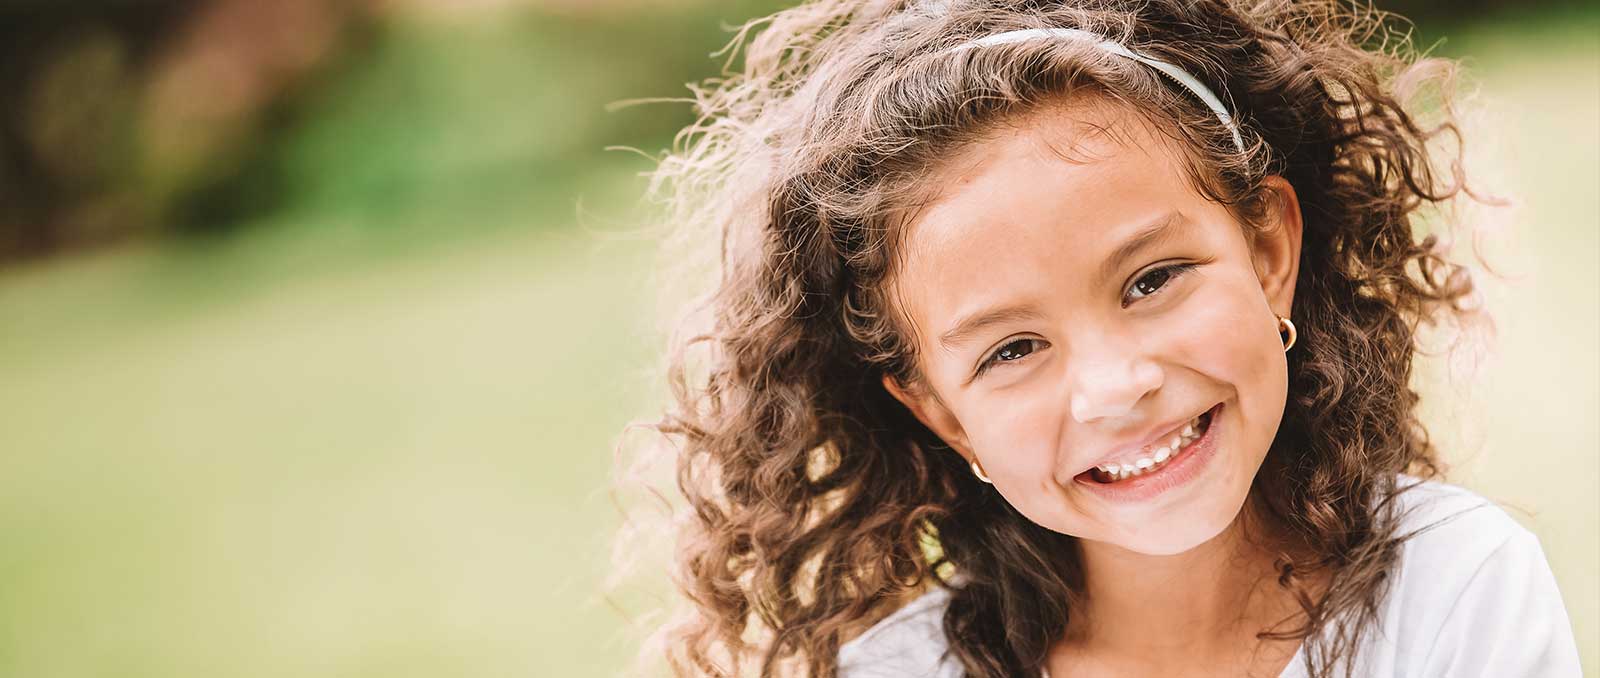 Little girl with curly hair smiling and sitting outside with a green blurred background.